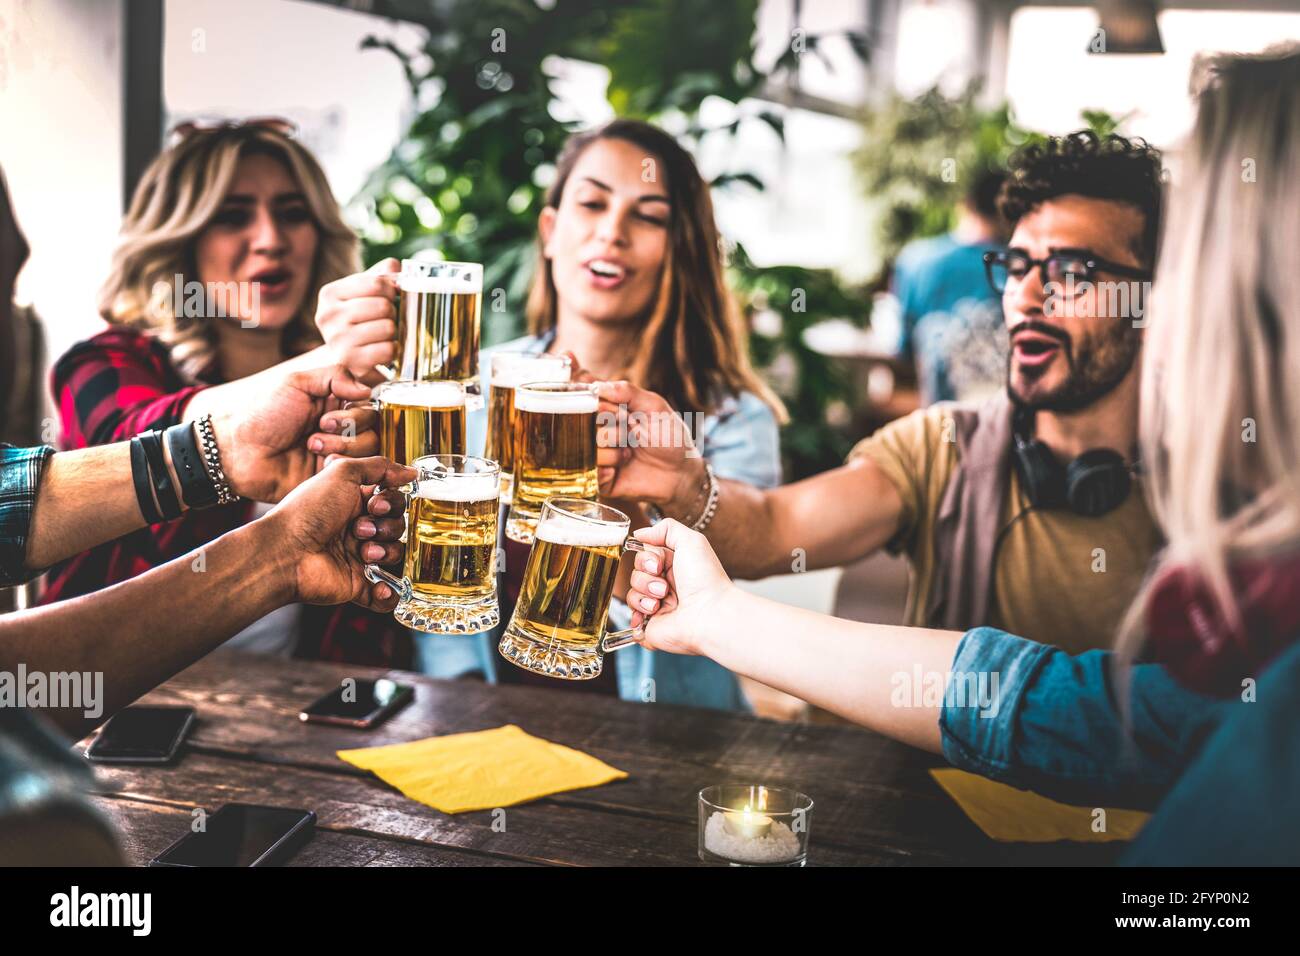 Friends toasting beer at brewery bar indoor at rooftop party - Friendship concept with young people having fun together drinking at happy hour Stock Photo